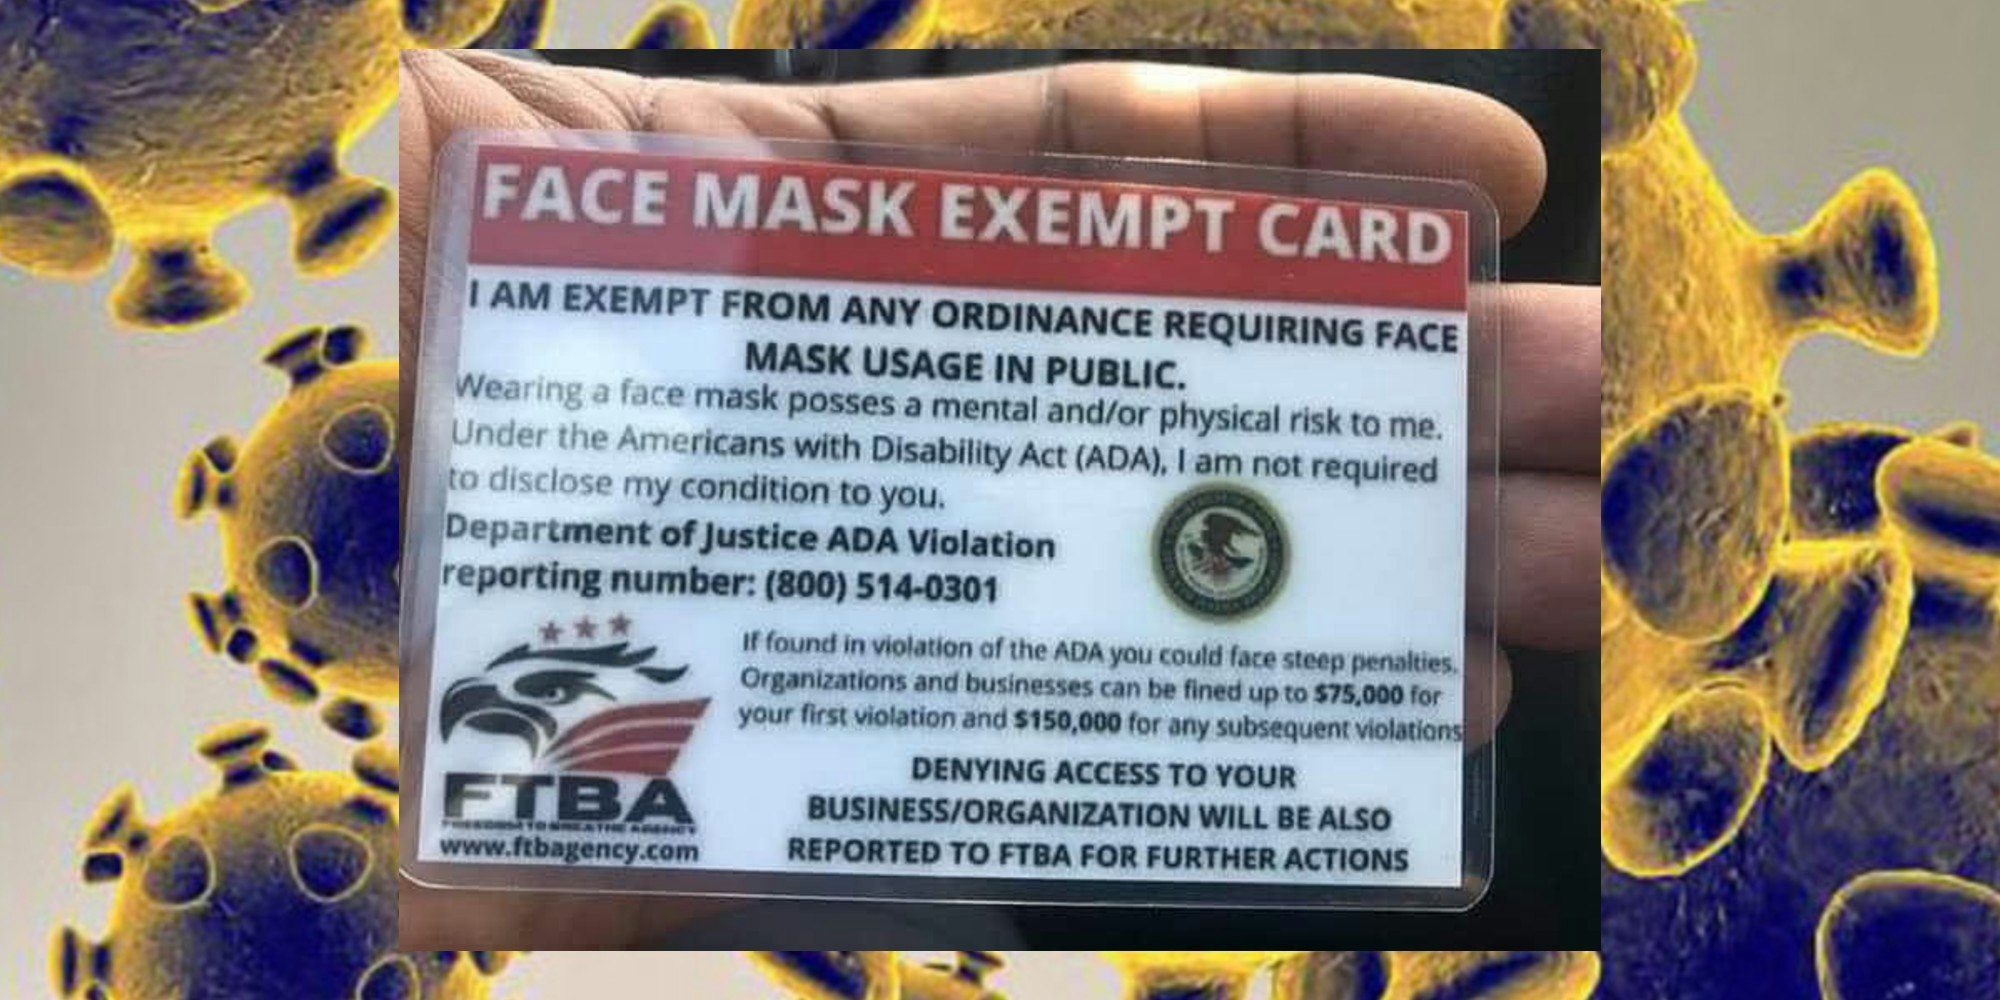 don-t-let-this-face-mask-exemption-card-fool-you